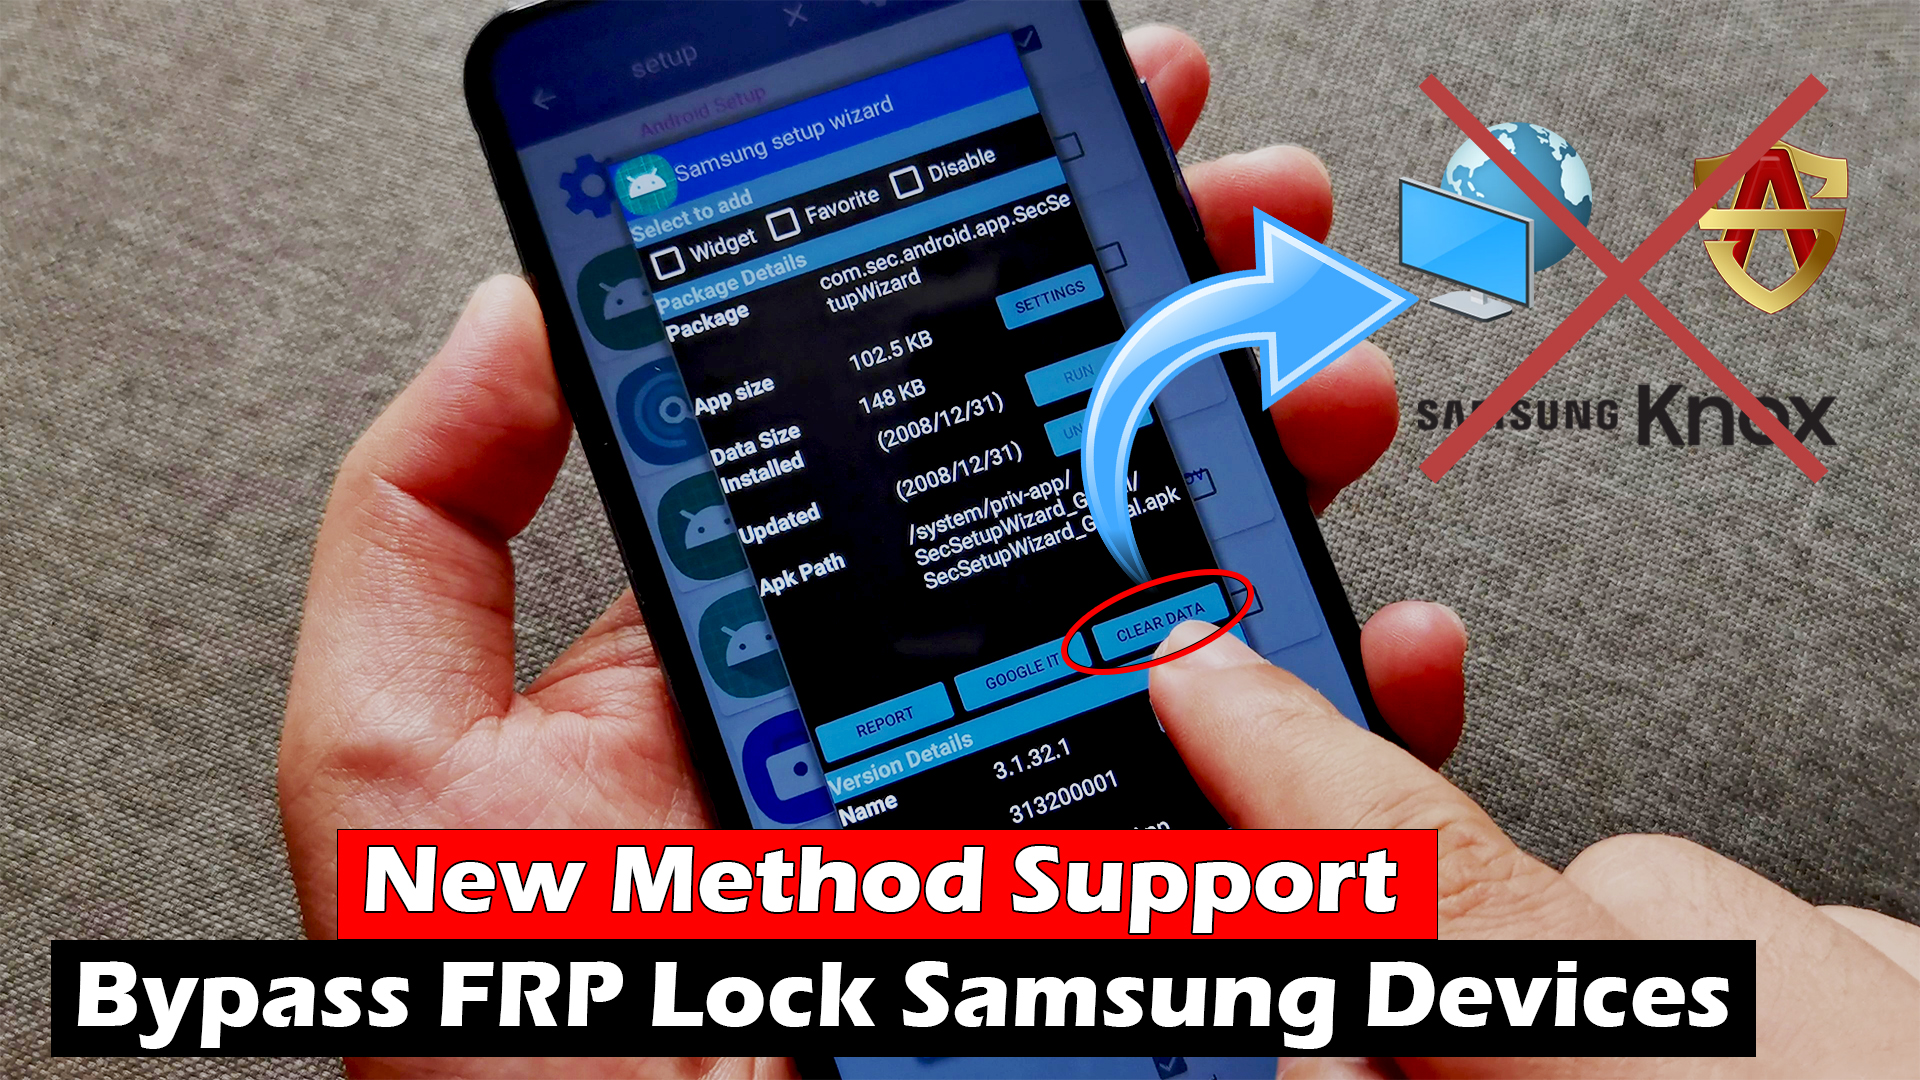 SAMSUNG FRP BYPASS ANDROID 11 WITHOUT PC  Alliance Shield X APP Not Show  Fix 